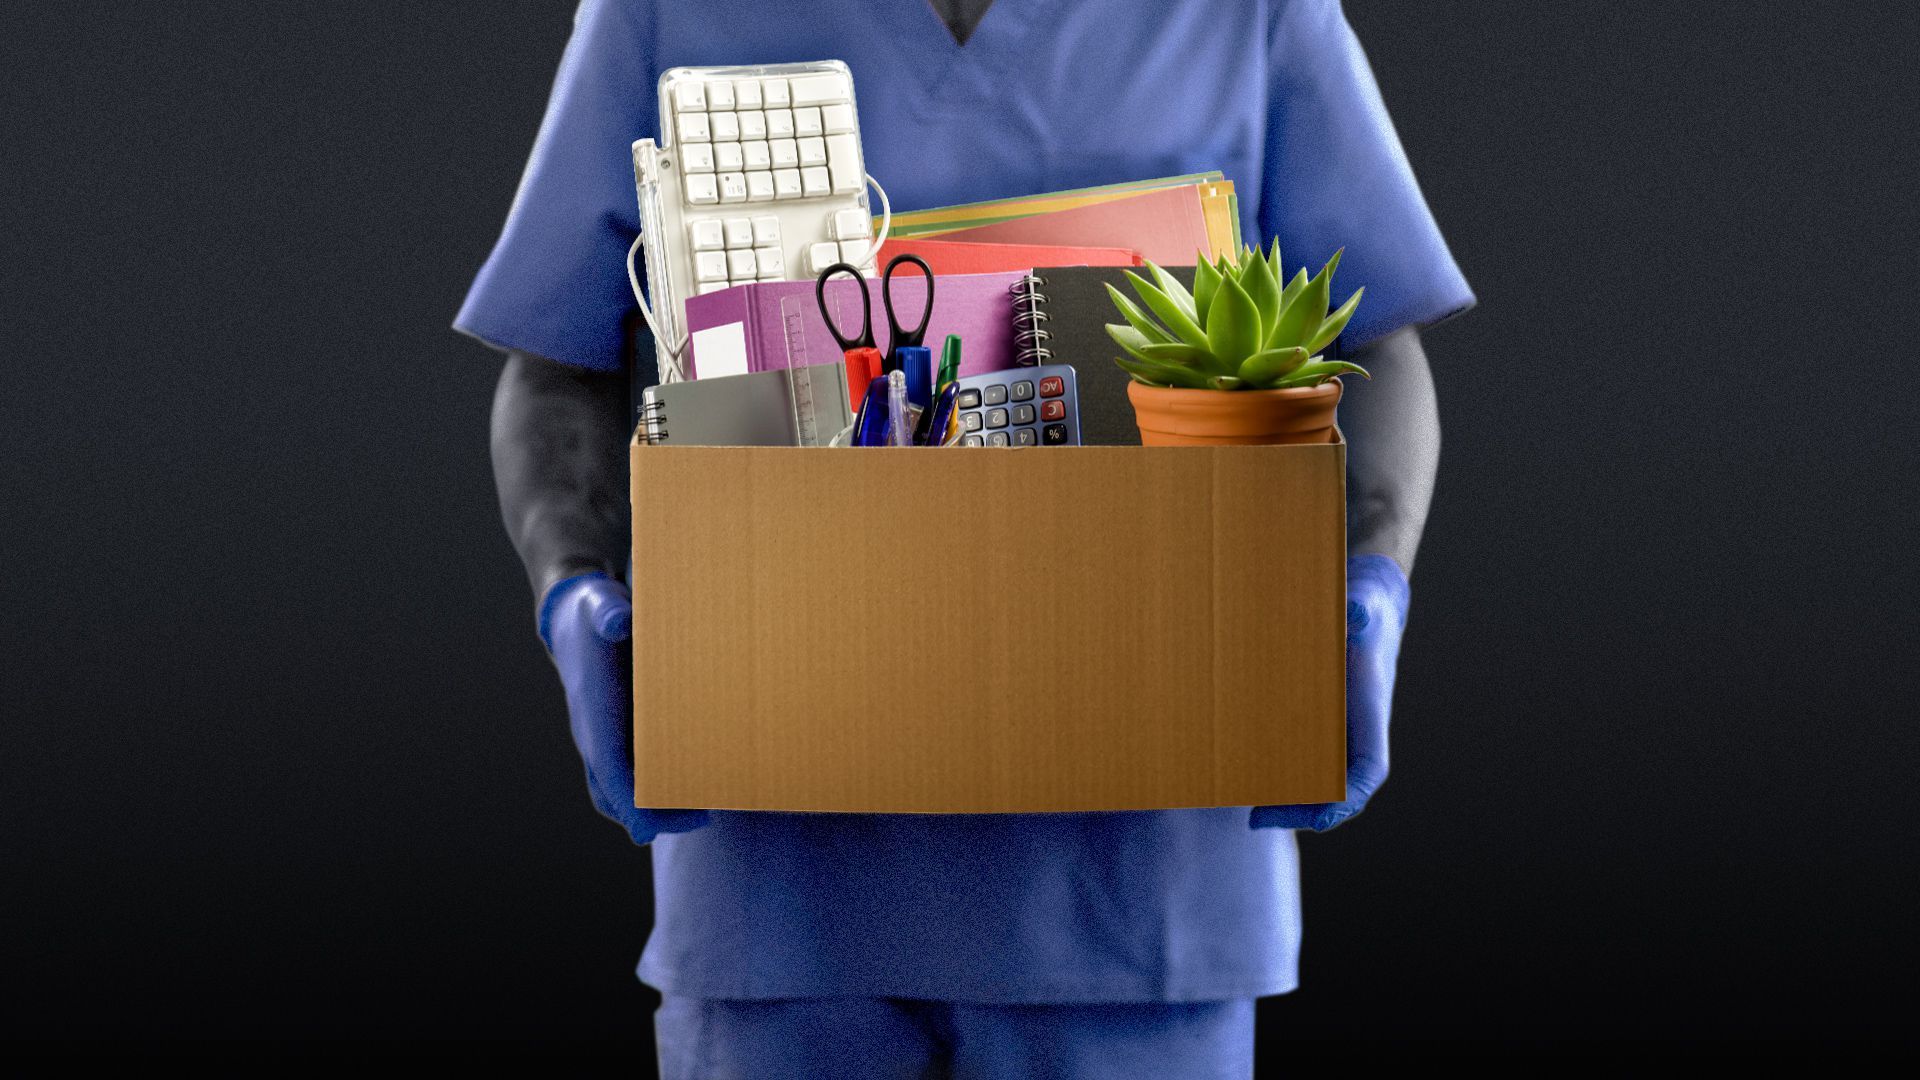 Illustration of a health professional carrying a cardboard box packed with office items.